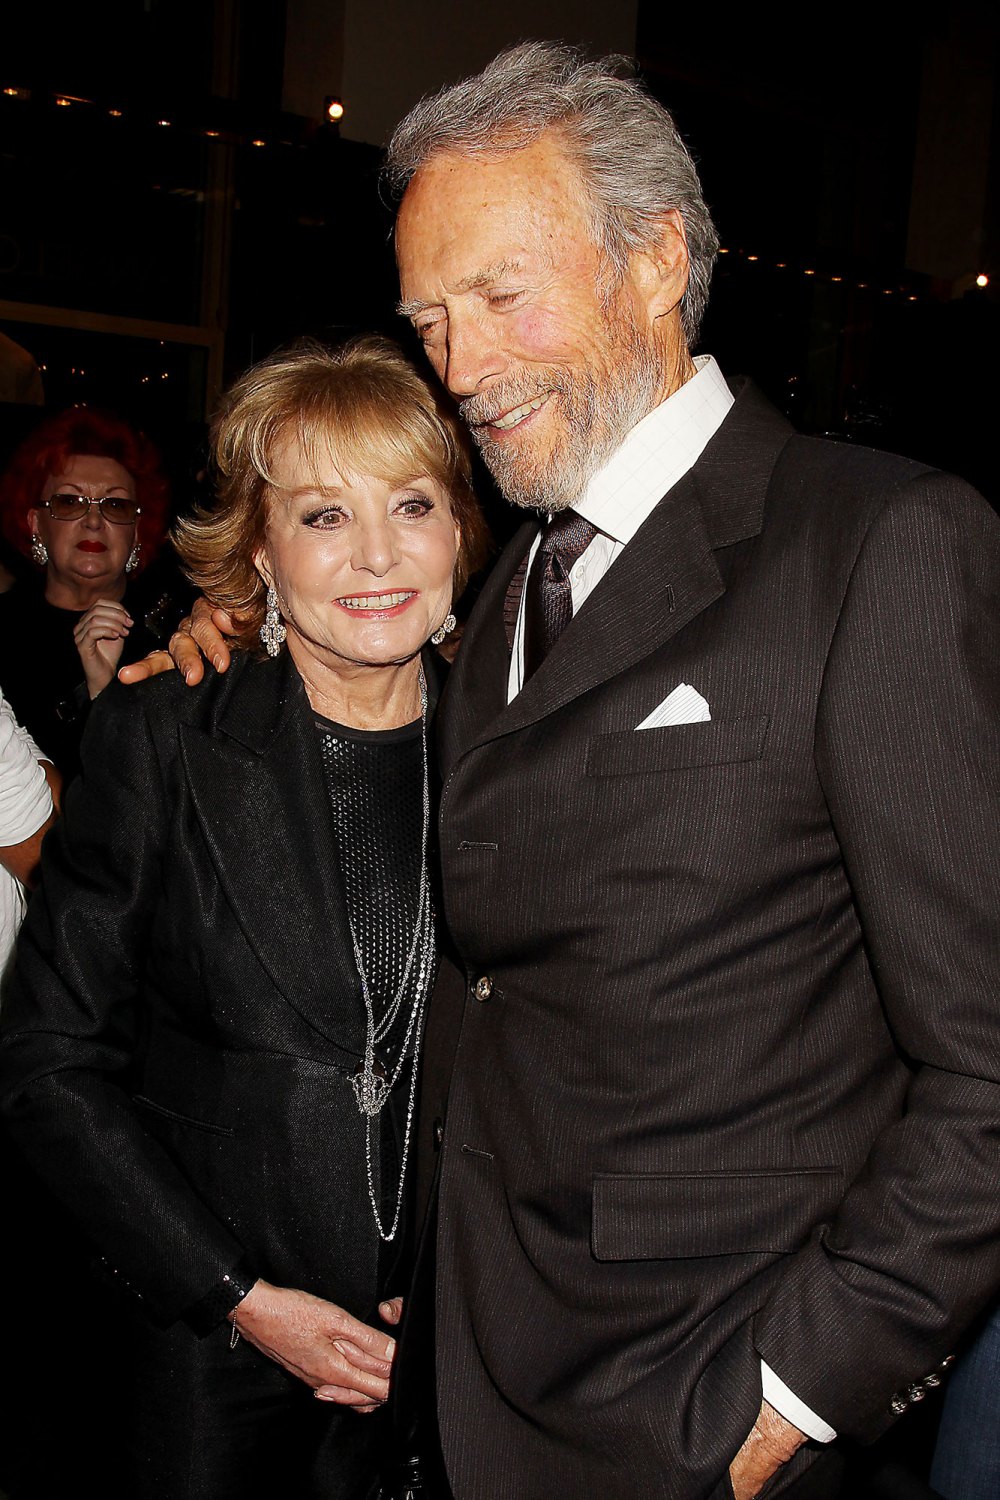 Barbara Walters: “I Could Have Been Mrs. Clint Eastwood!”